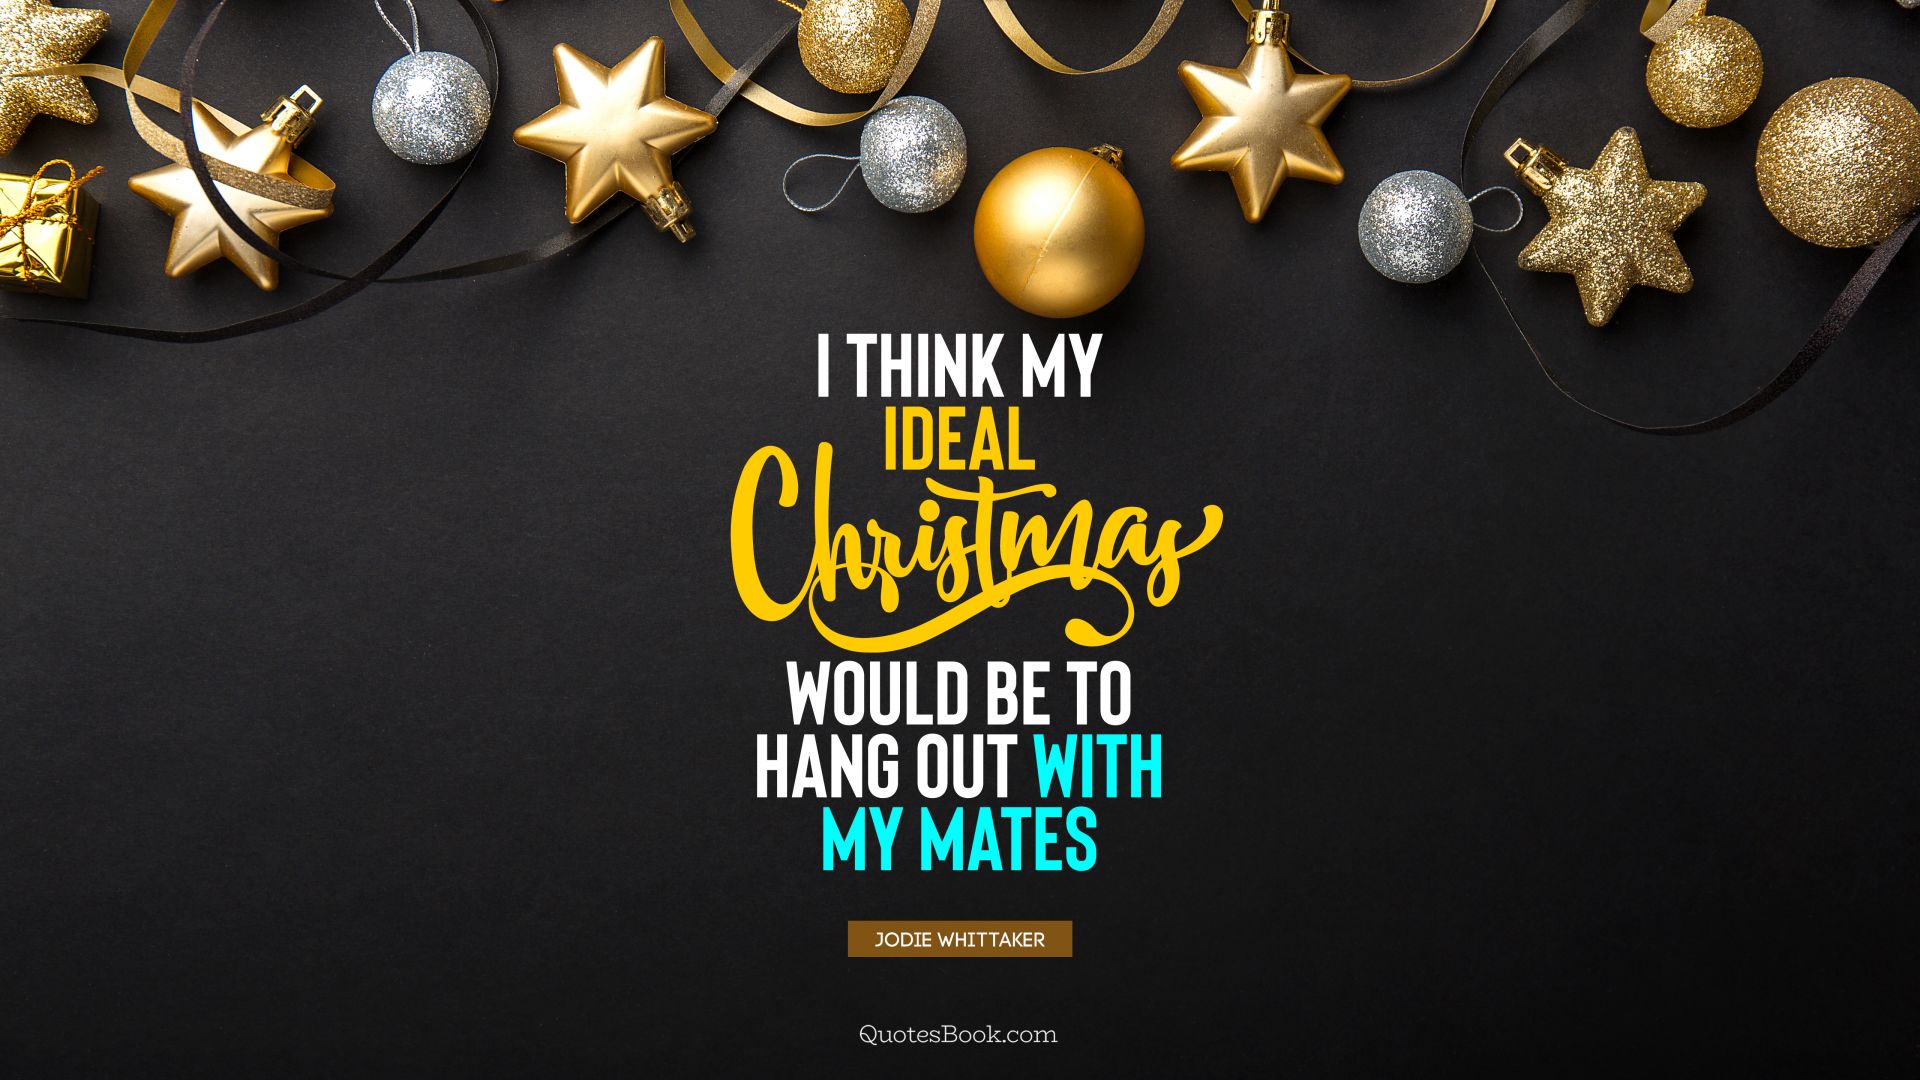 I think my ideal Christmas would be to hang out with my mates. - Quote by Jodie Whittaker